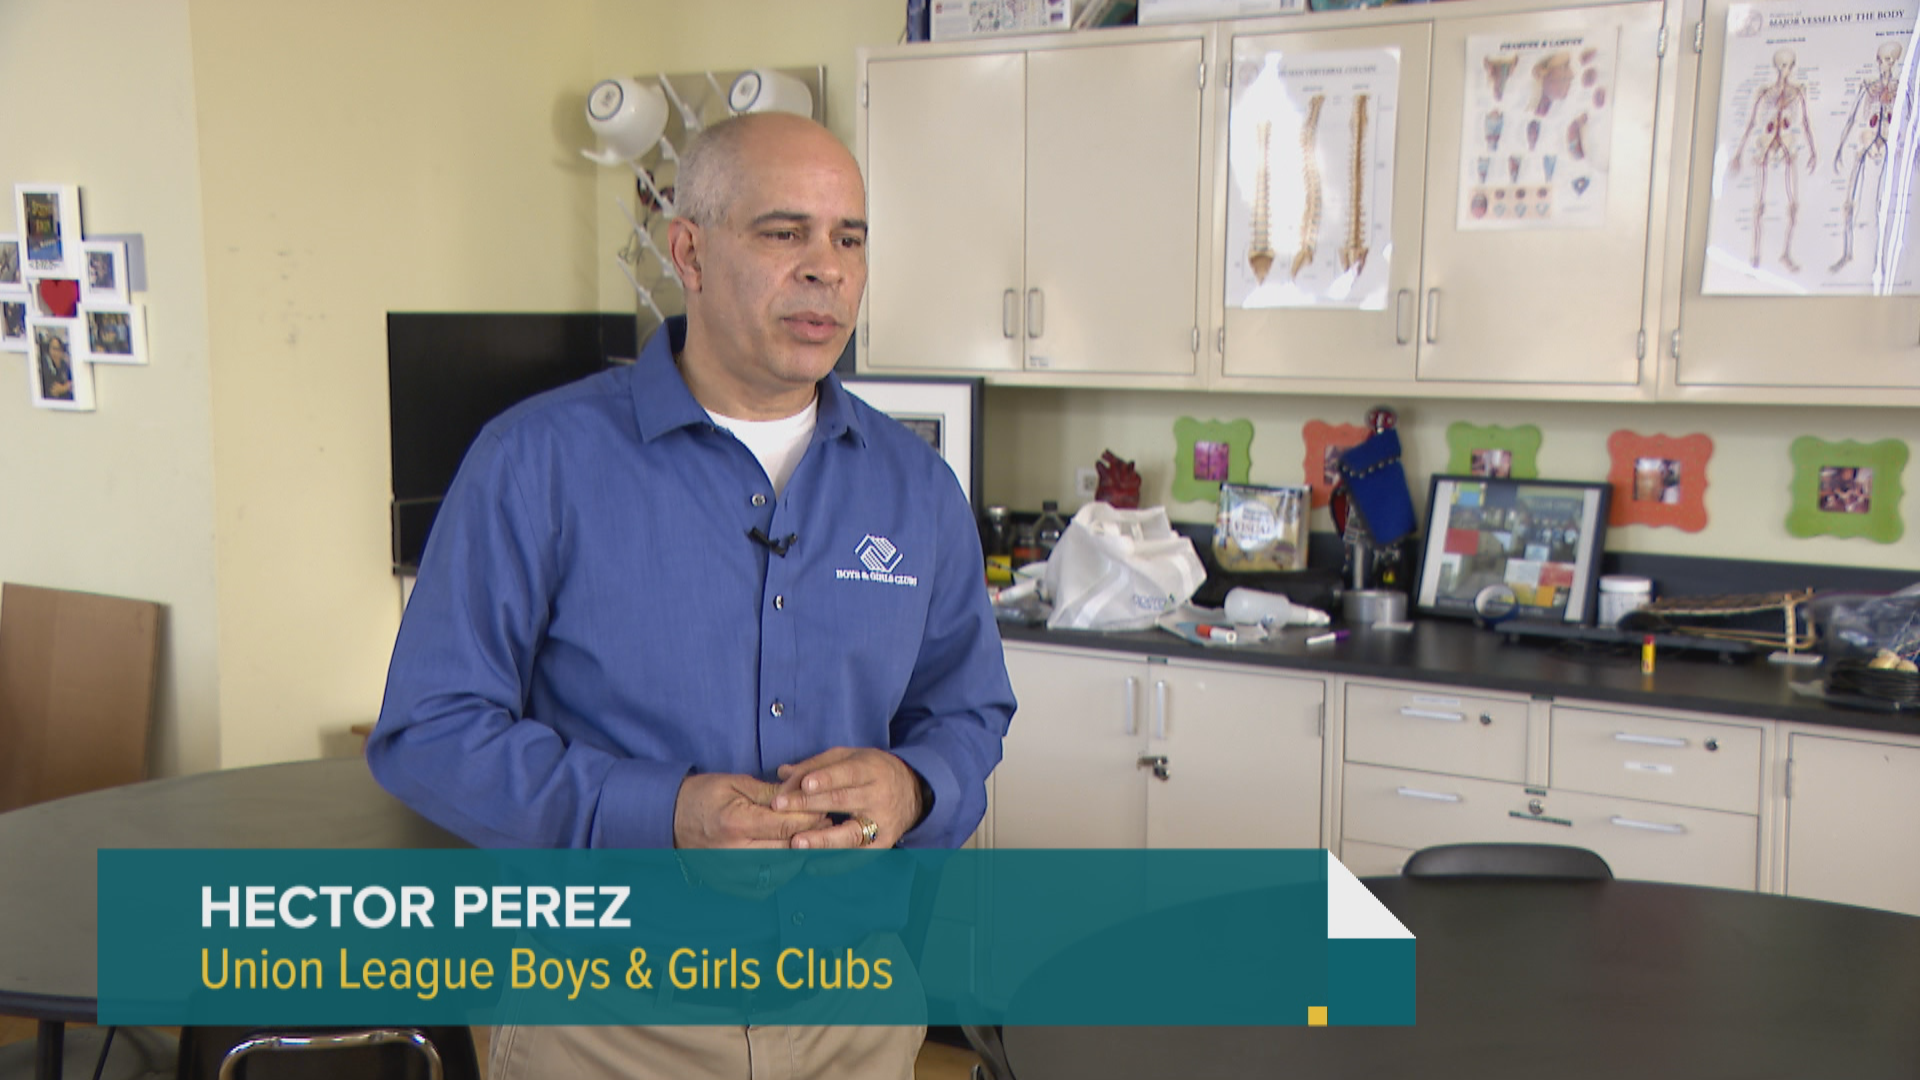 Boys & Girls Clubs of Chicago  Provides Chicago's children a safe